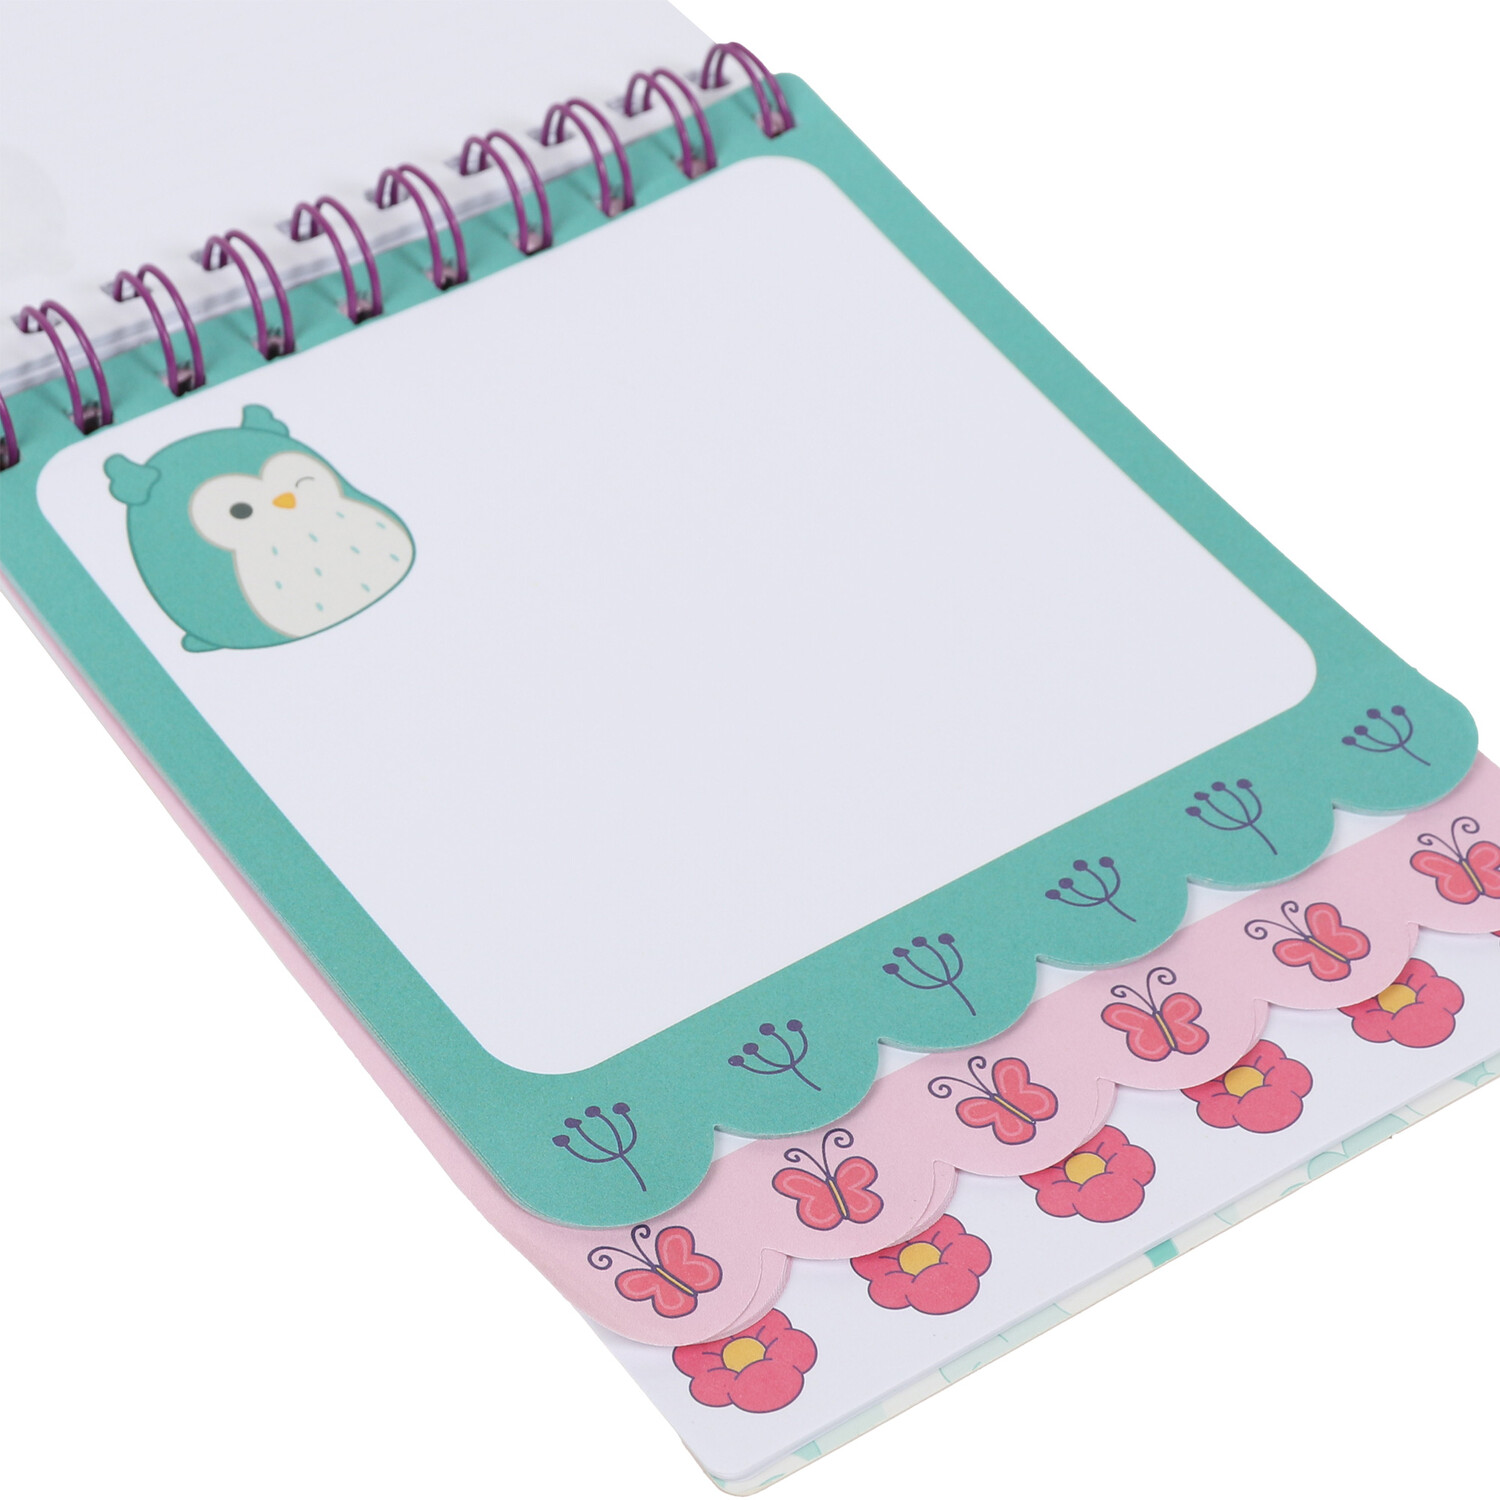 Squishmallows Pink Layered Notebook Image 4